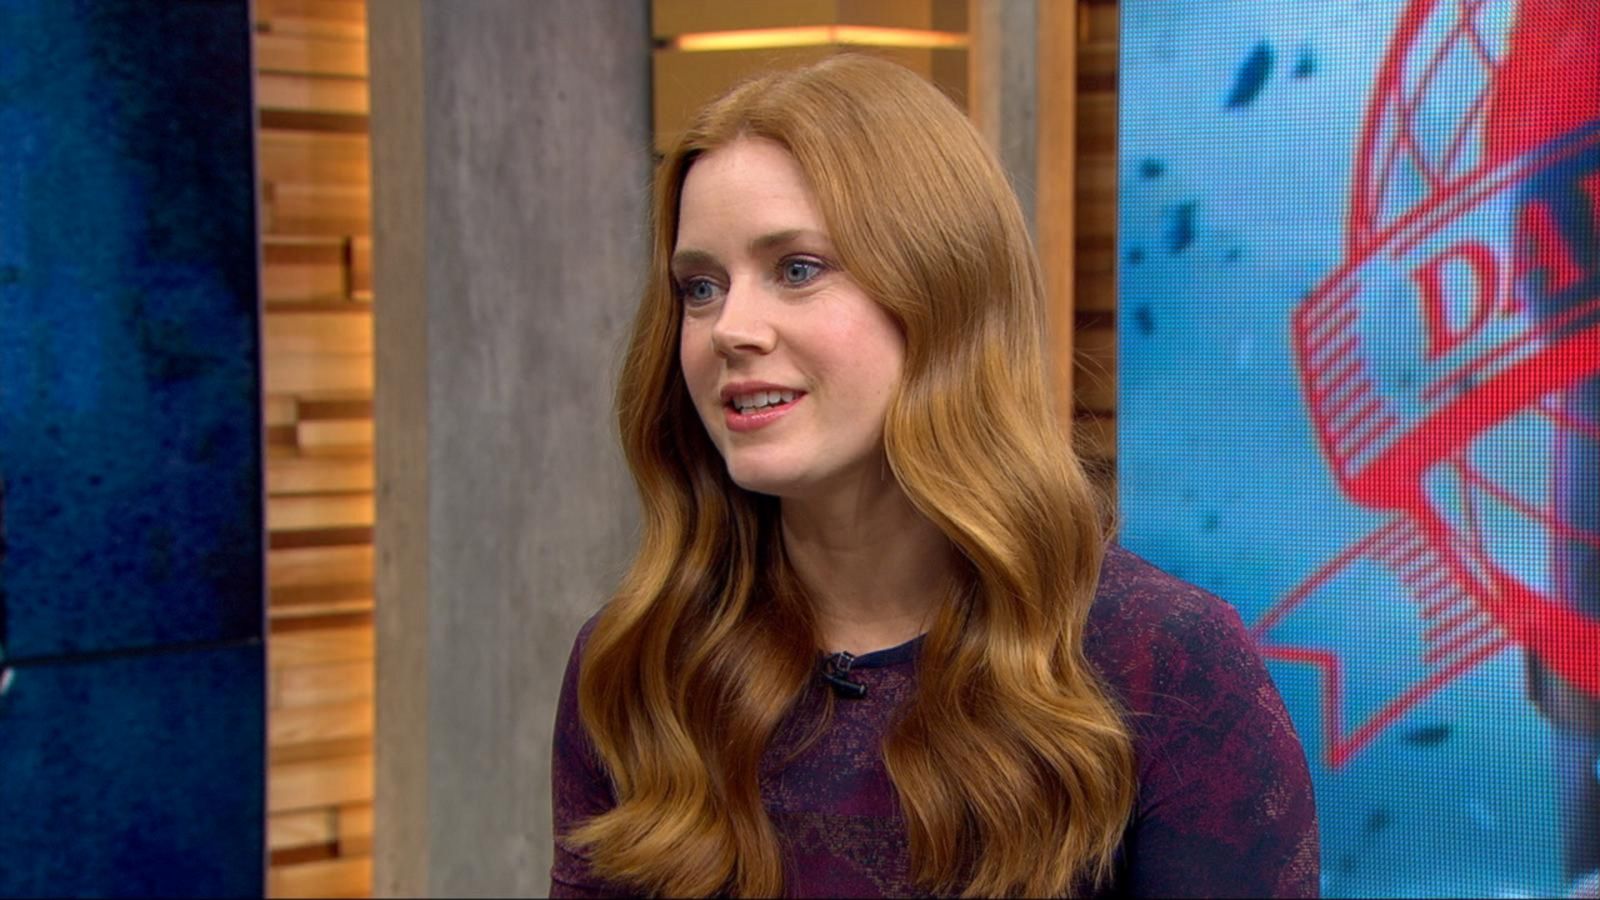 Batman v Superman': Amy Adams on Playing Lois Lane, Shirtless Scenes With  Henry Cavill - ABC News